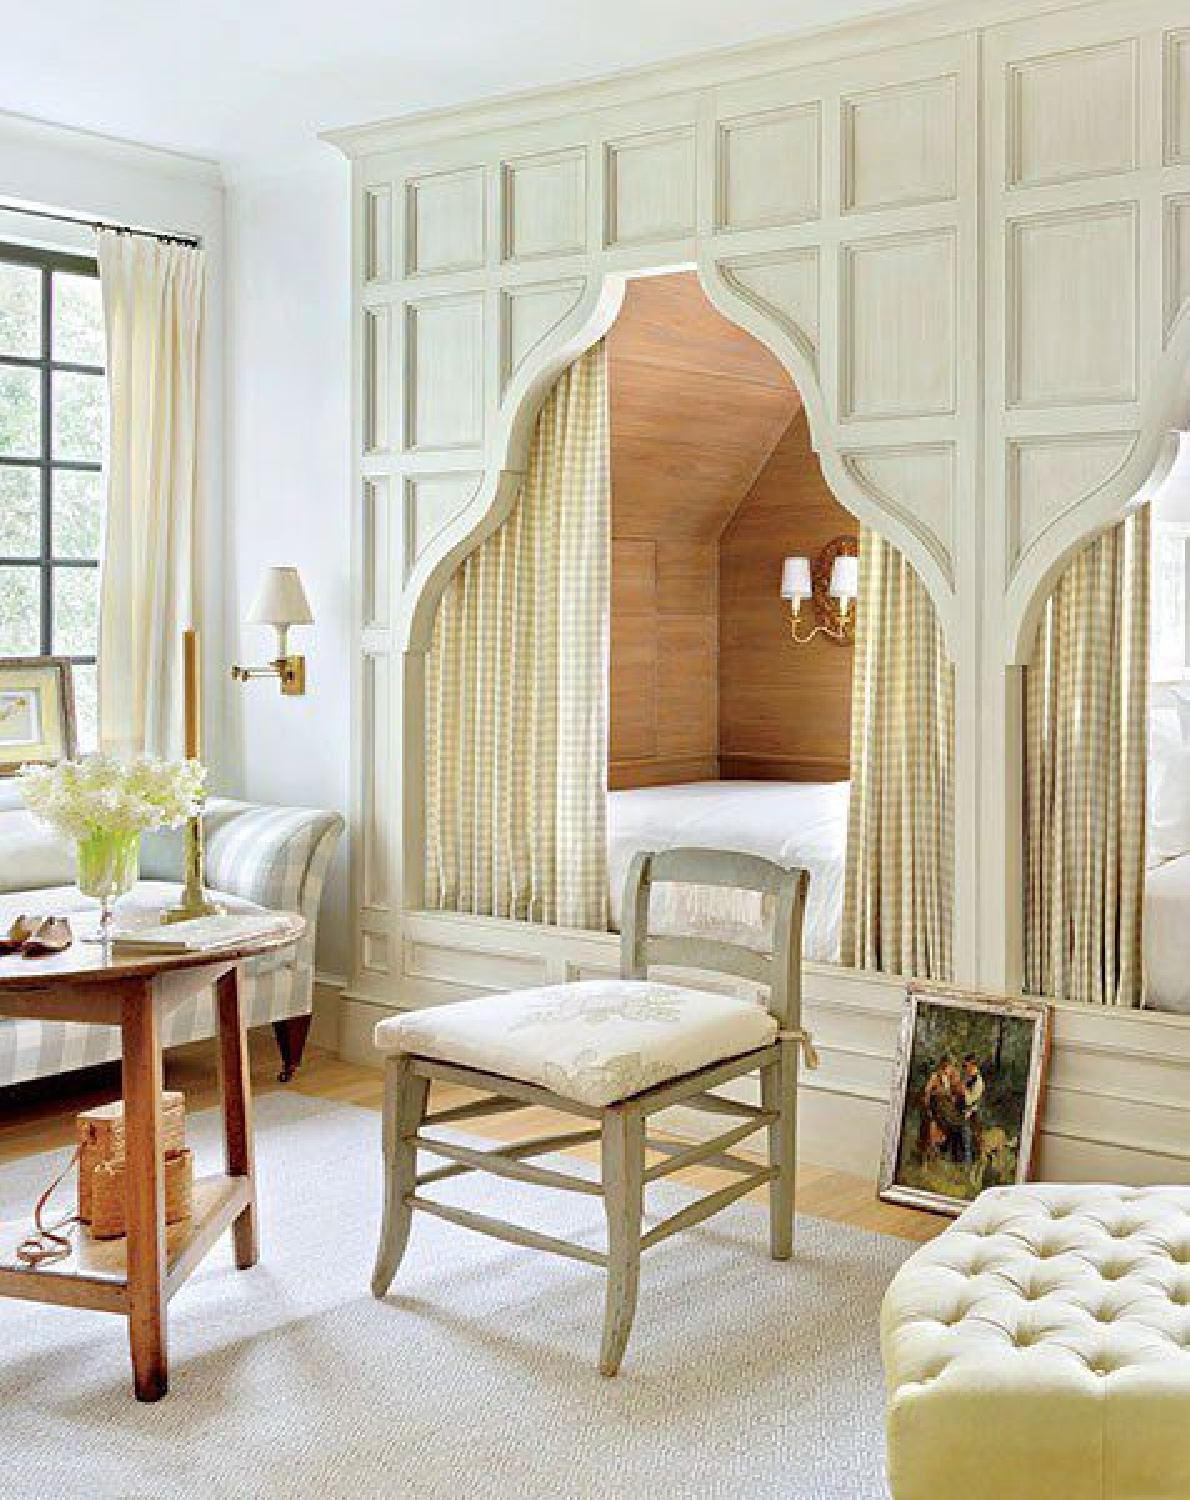 Beautiful bed nooks designed by McAlpine House in AD. #bednooks